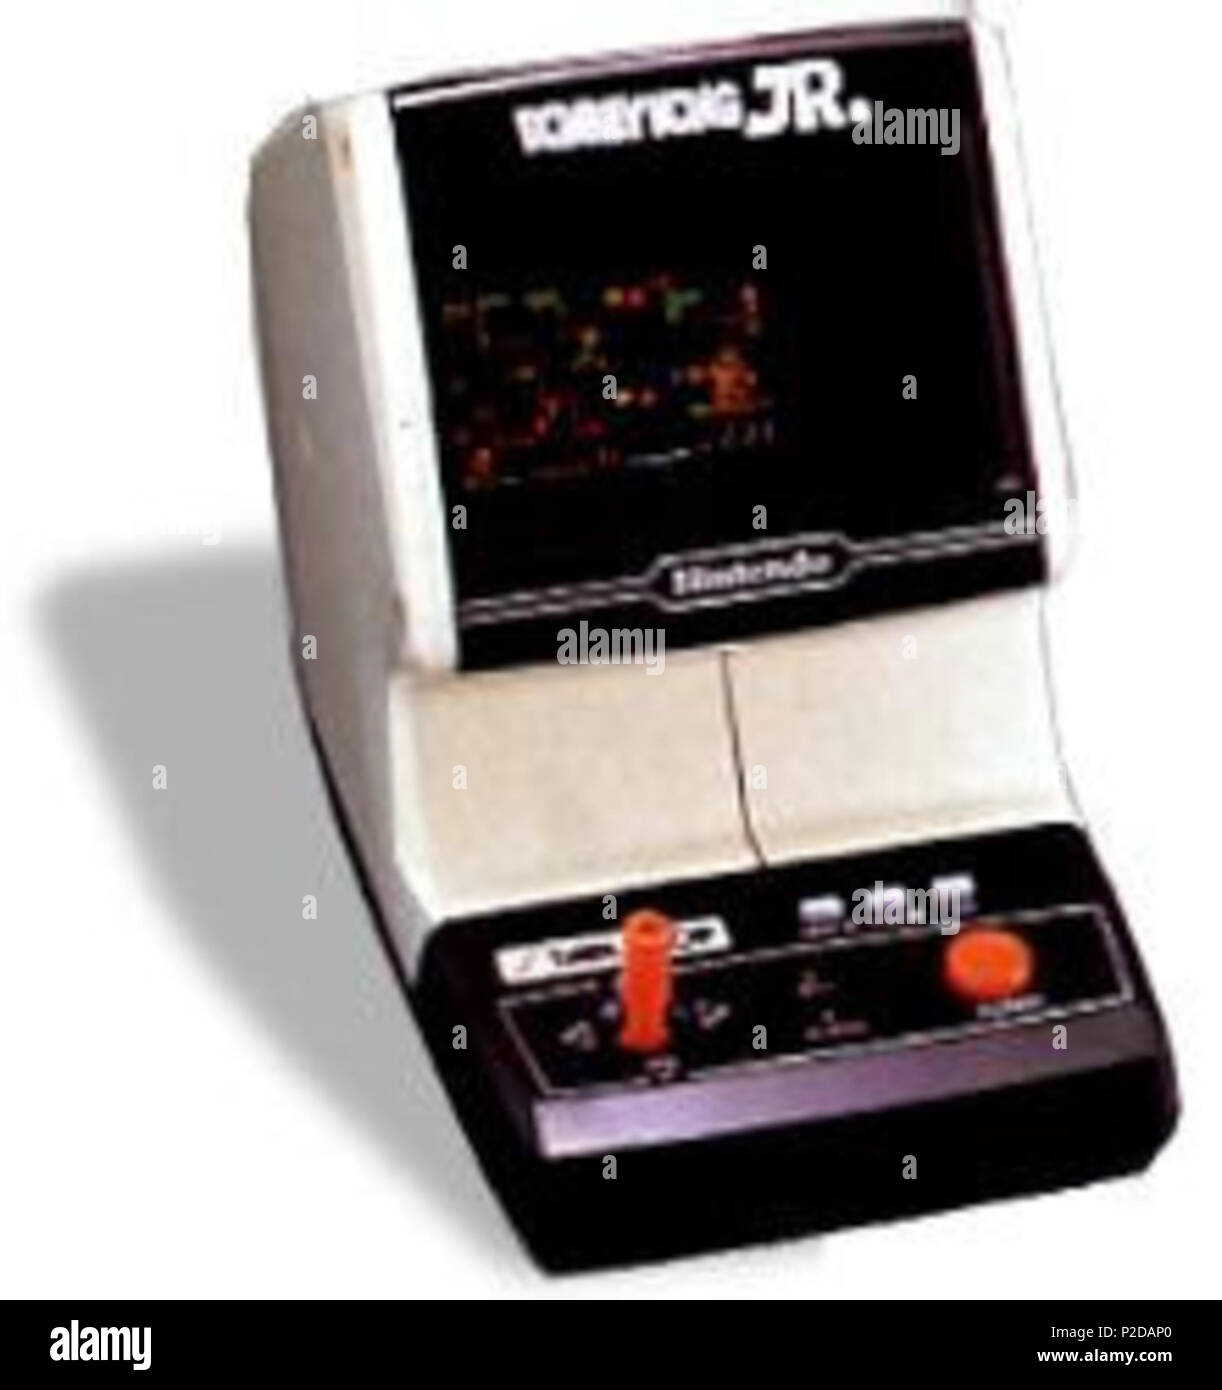 donkey kong old game console